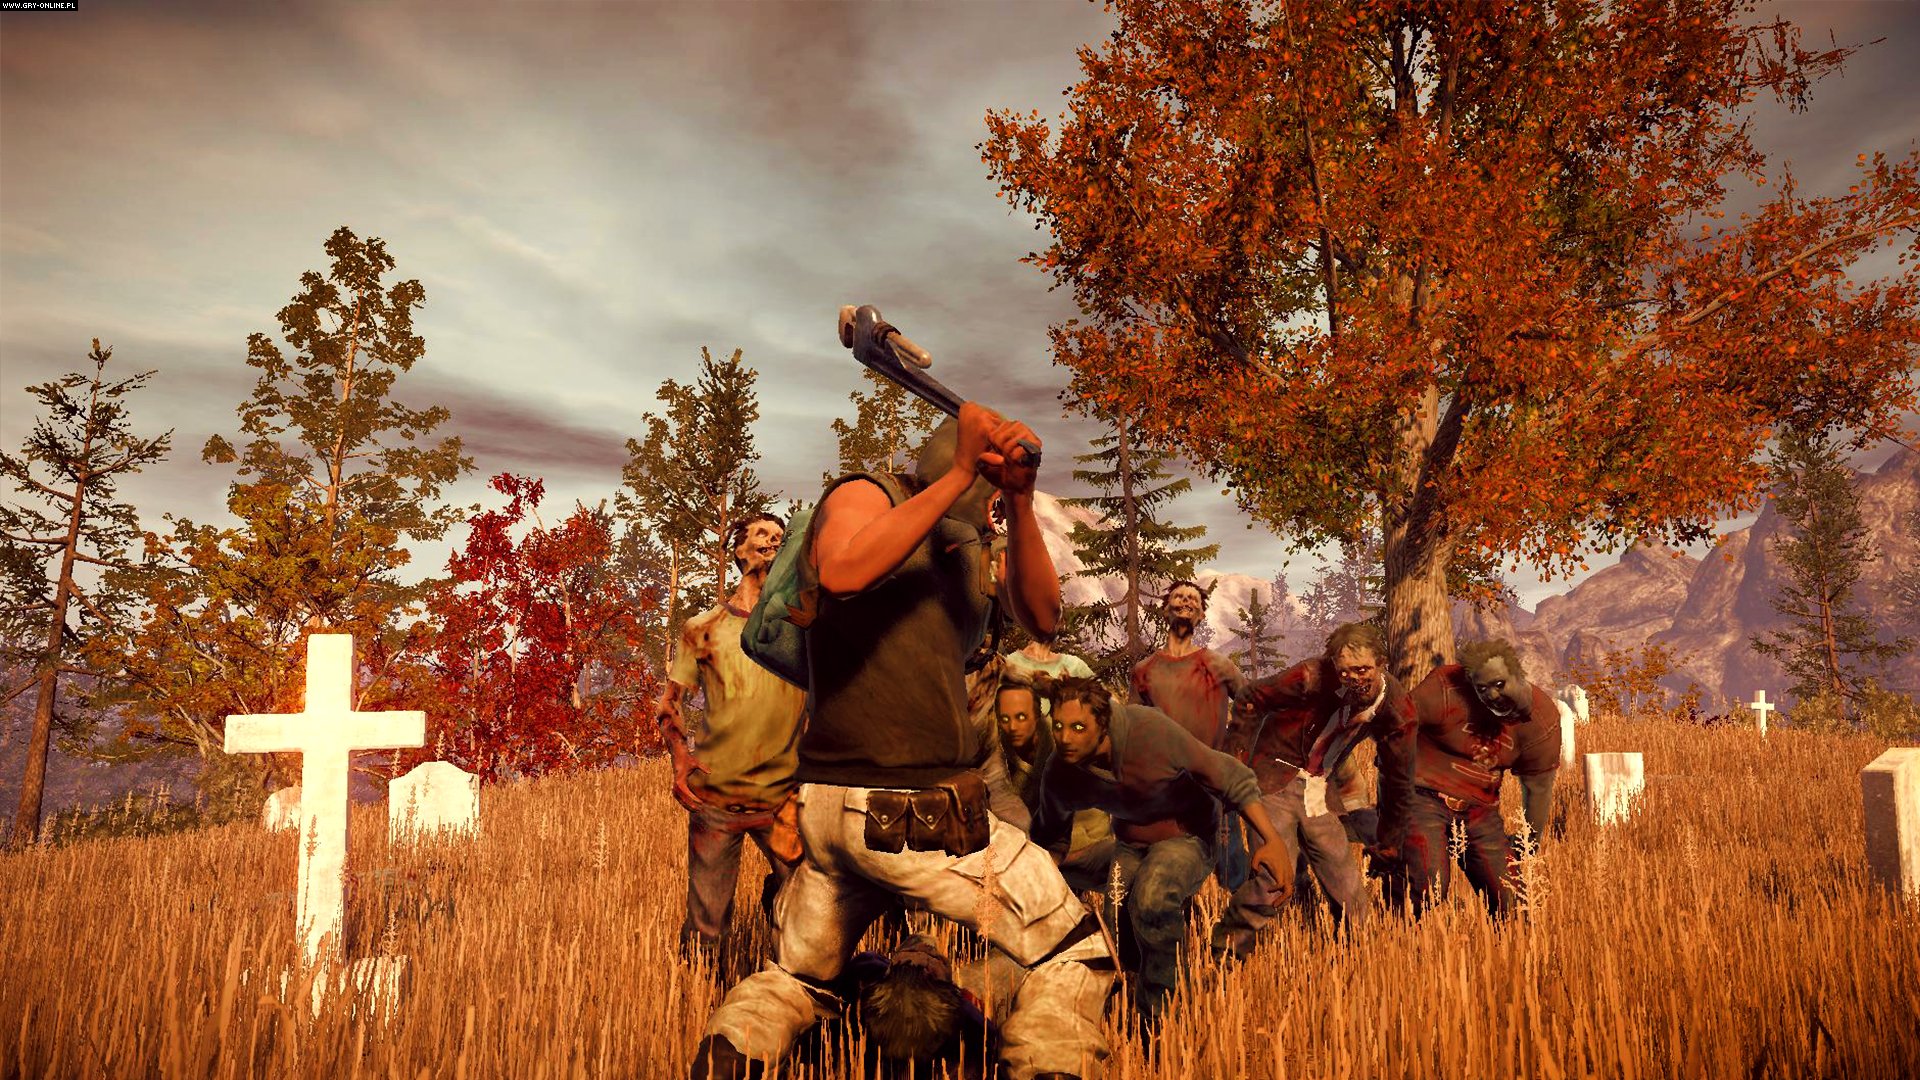 state of decay year one survival edition wiki